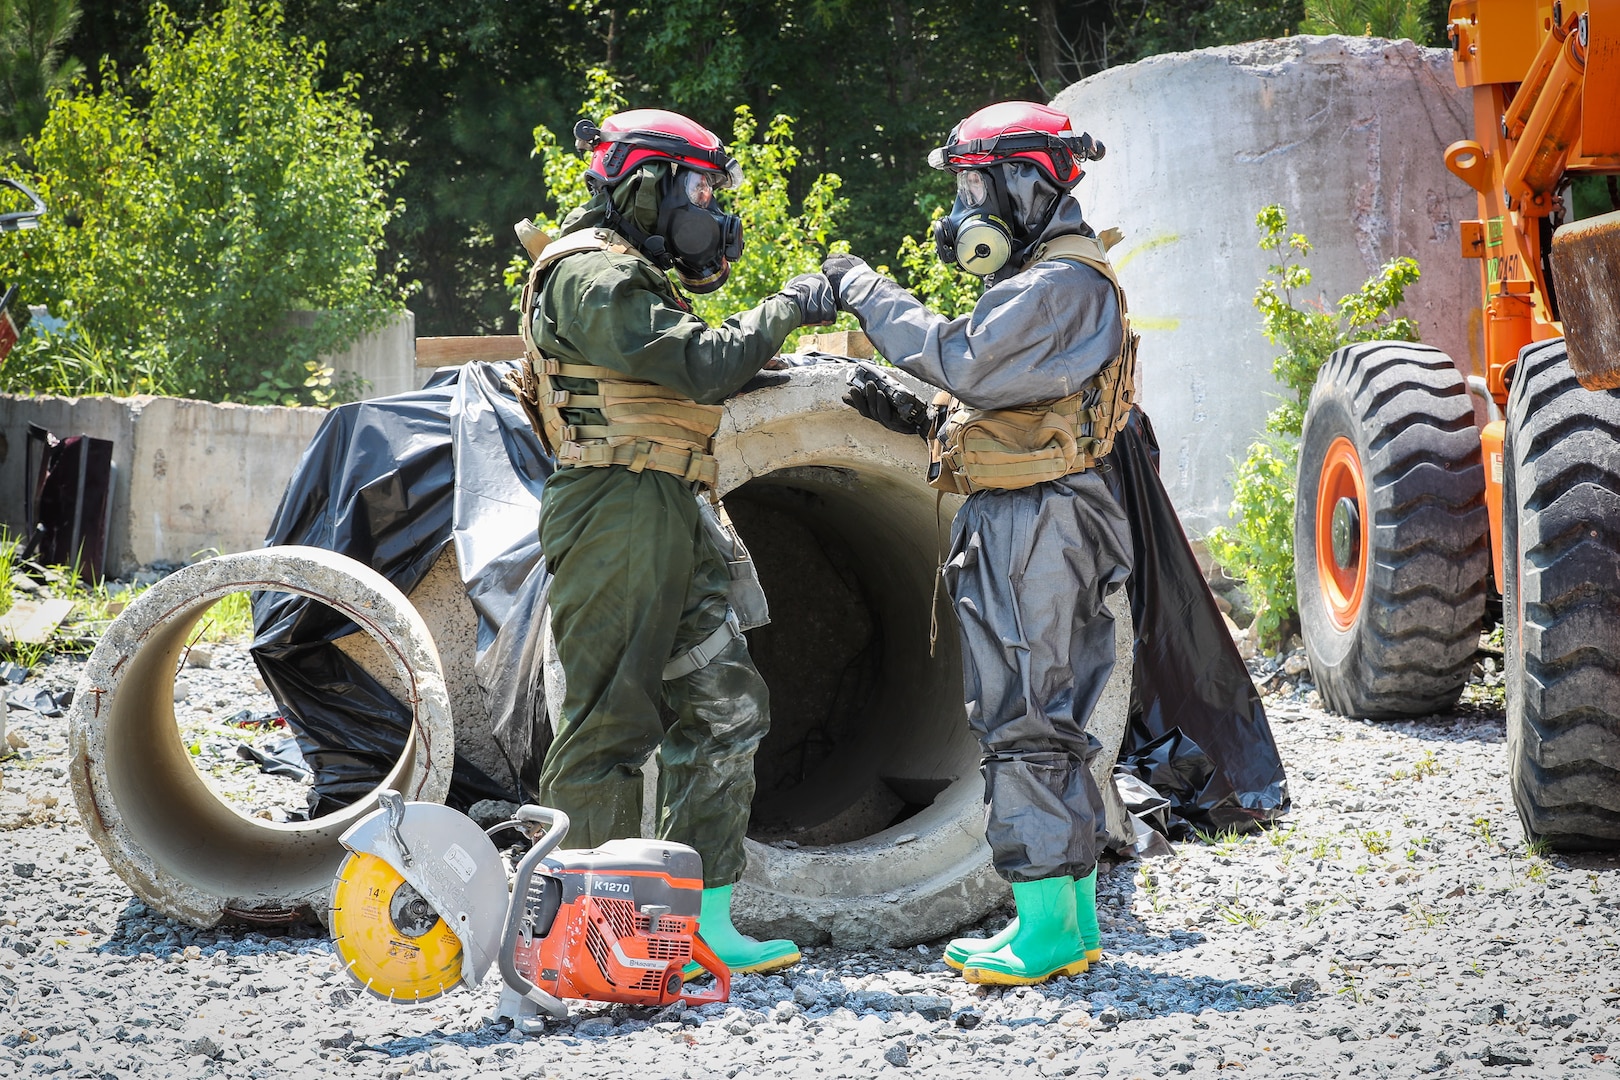 A Chemical Biological Incident Response Force (CBIRF) Marine tags out his teammate during a concrete breaching exercise while developmental equipment monitors air quality during the Technology Experimentation and Characterization Field Trials at the CBIRF Downey Responder Training Facility, July 26-30. The trials were cohosted by Naval Surface Warfare Center Indian Head Division Chemical, Biological and Radiological Defense Division and CBIRF. (U.S. Navy photo by Matthew Poynor)